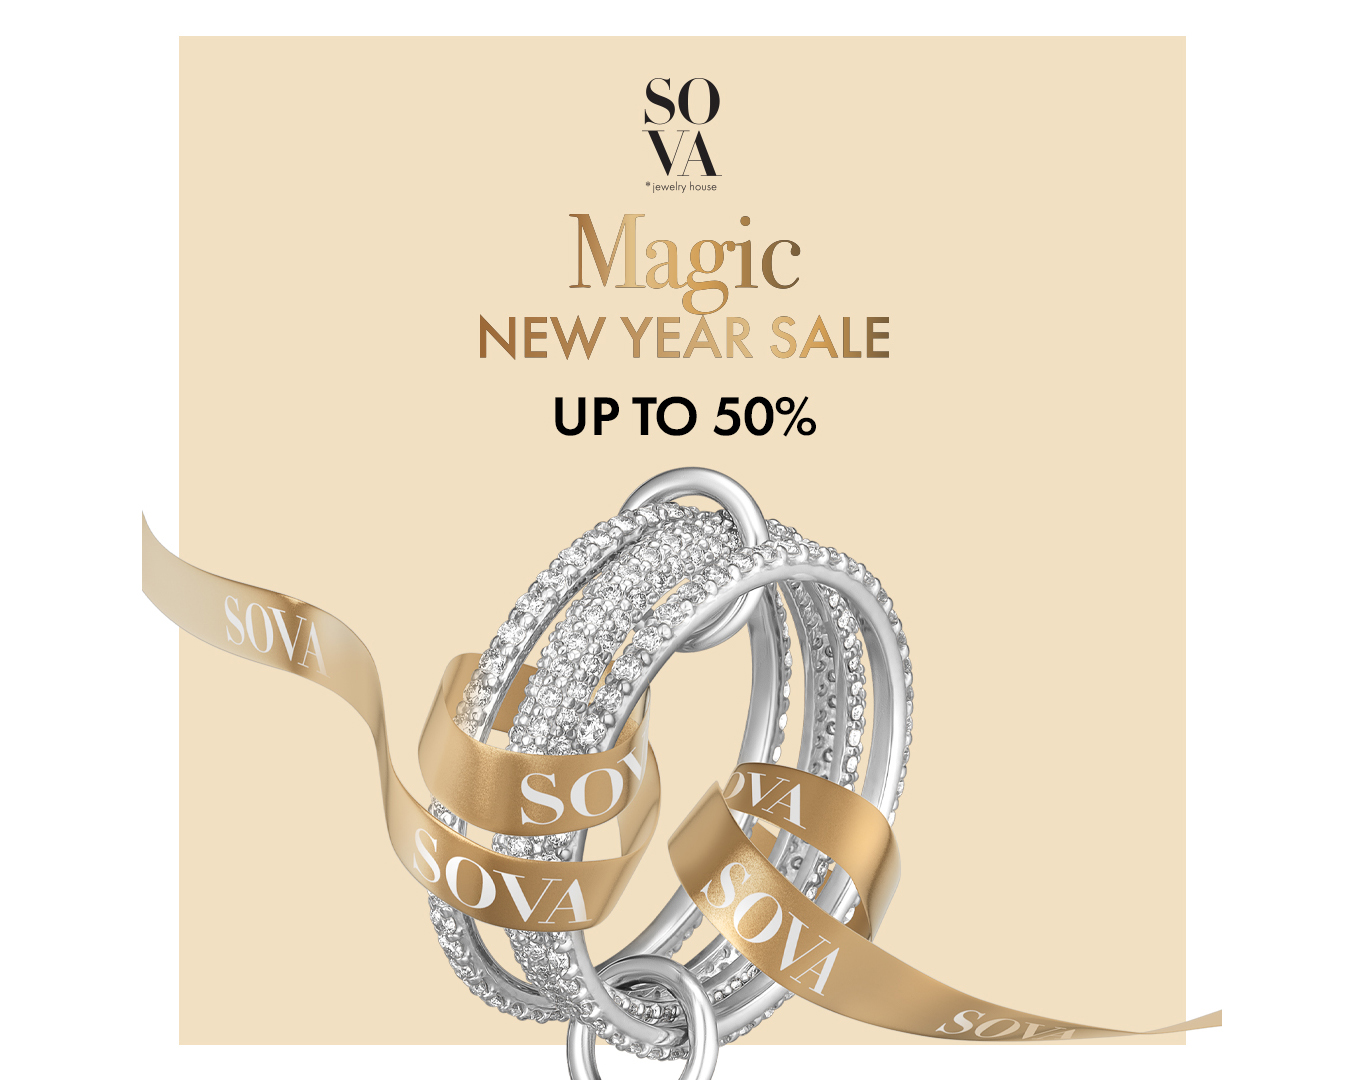 MAGIC NEW YEAR SALE up to 50%